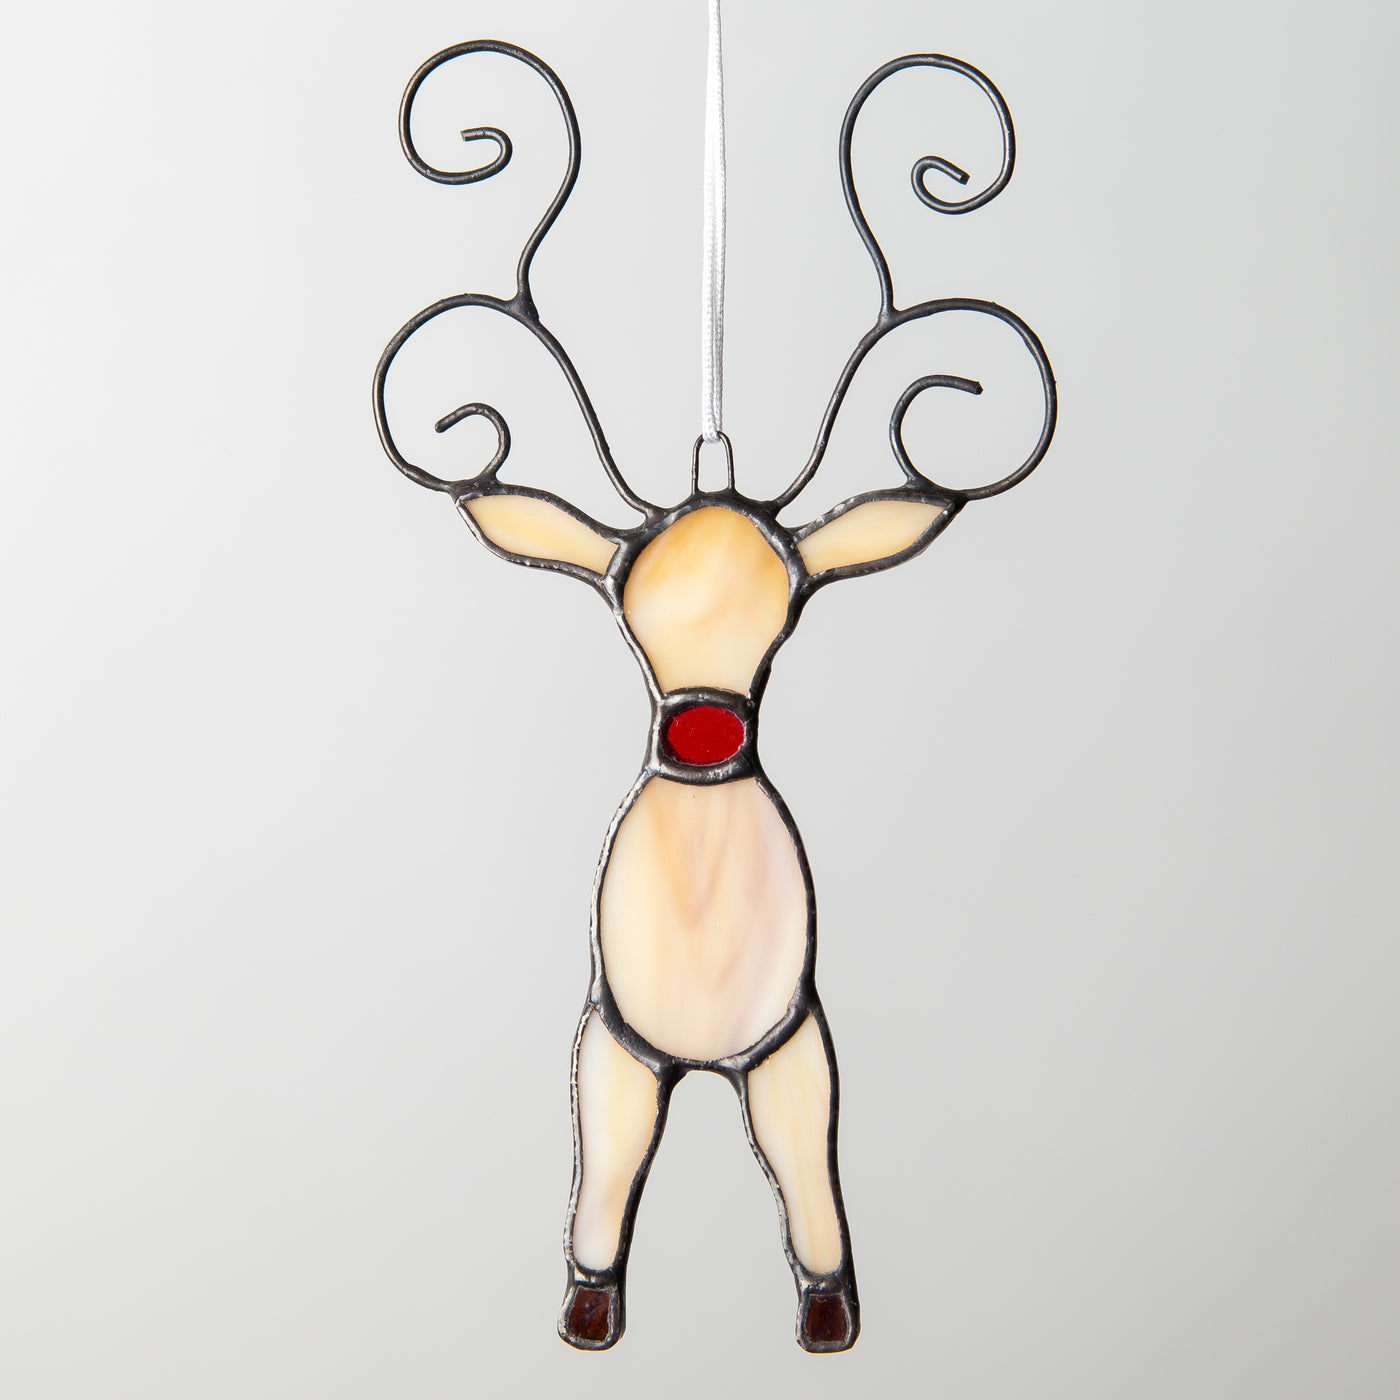 Stained glass reindeer window hanging for Christmas decor